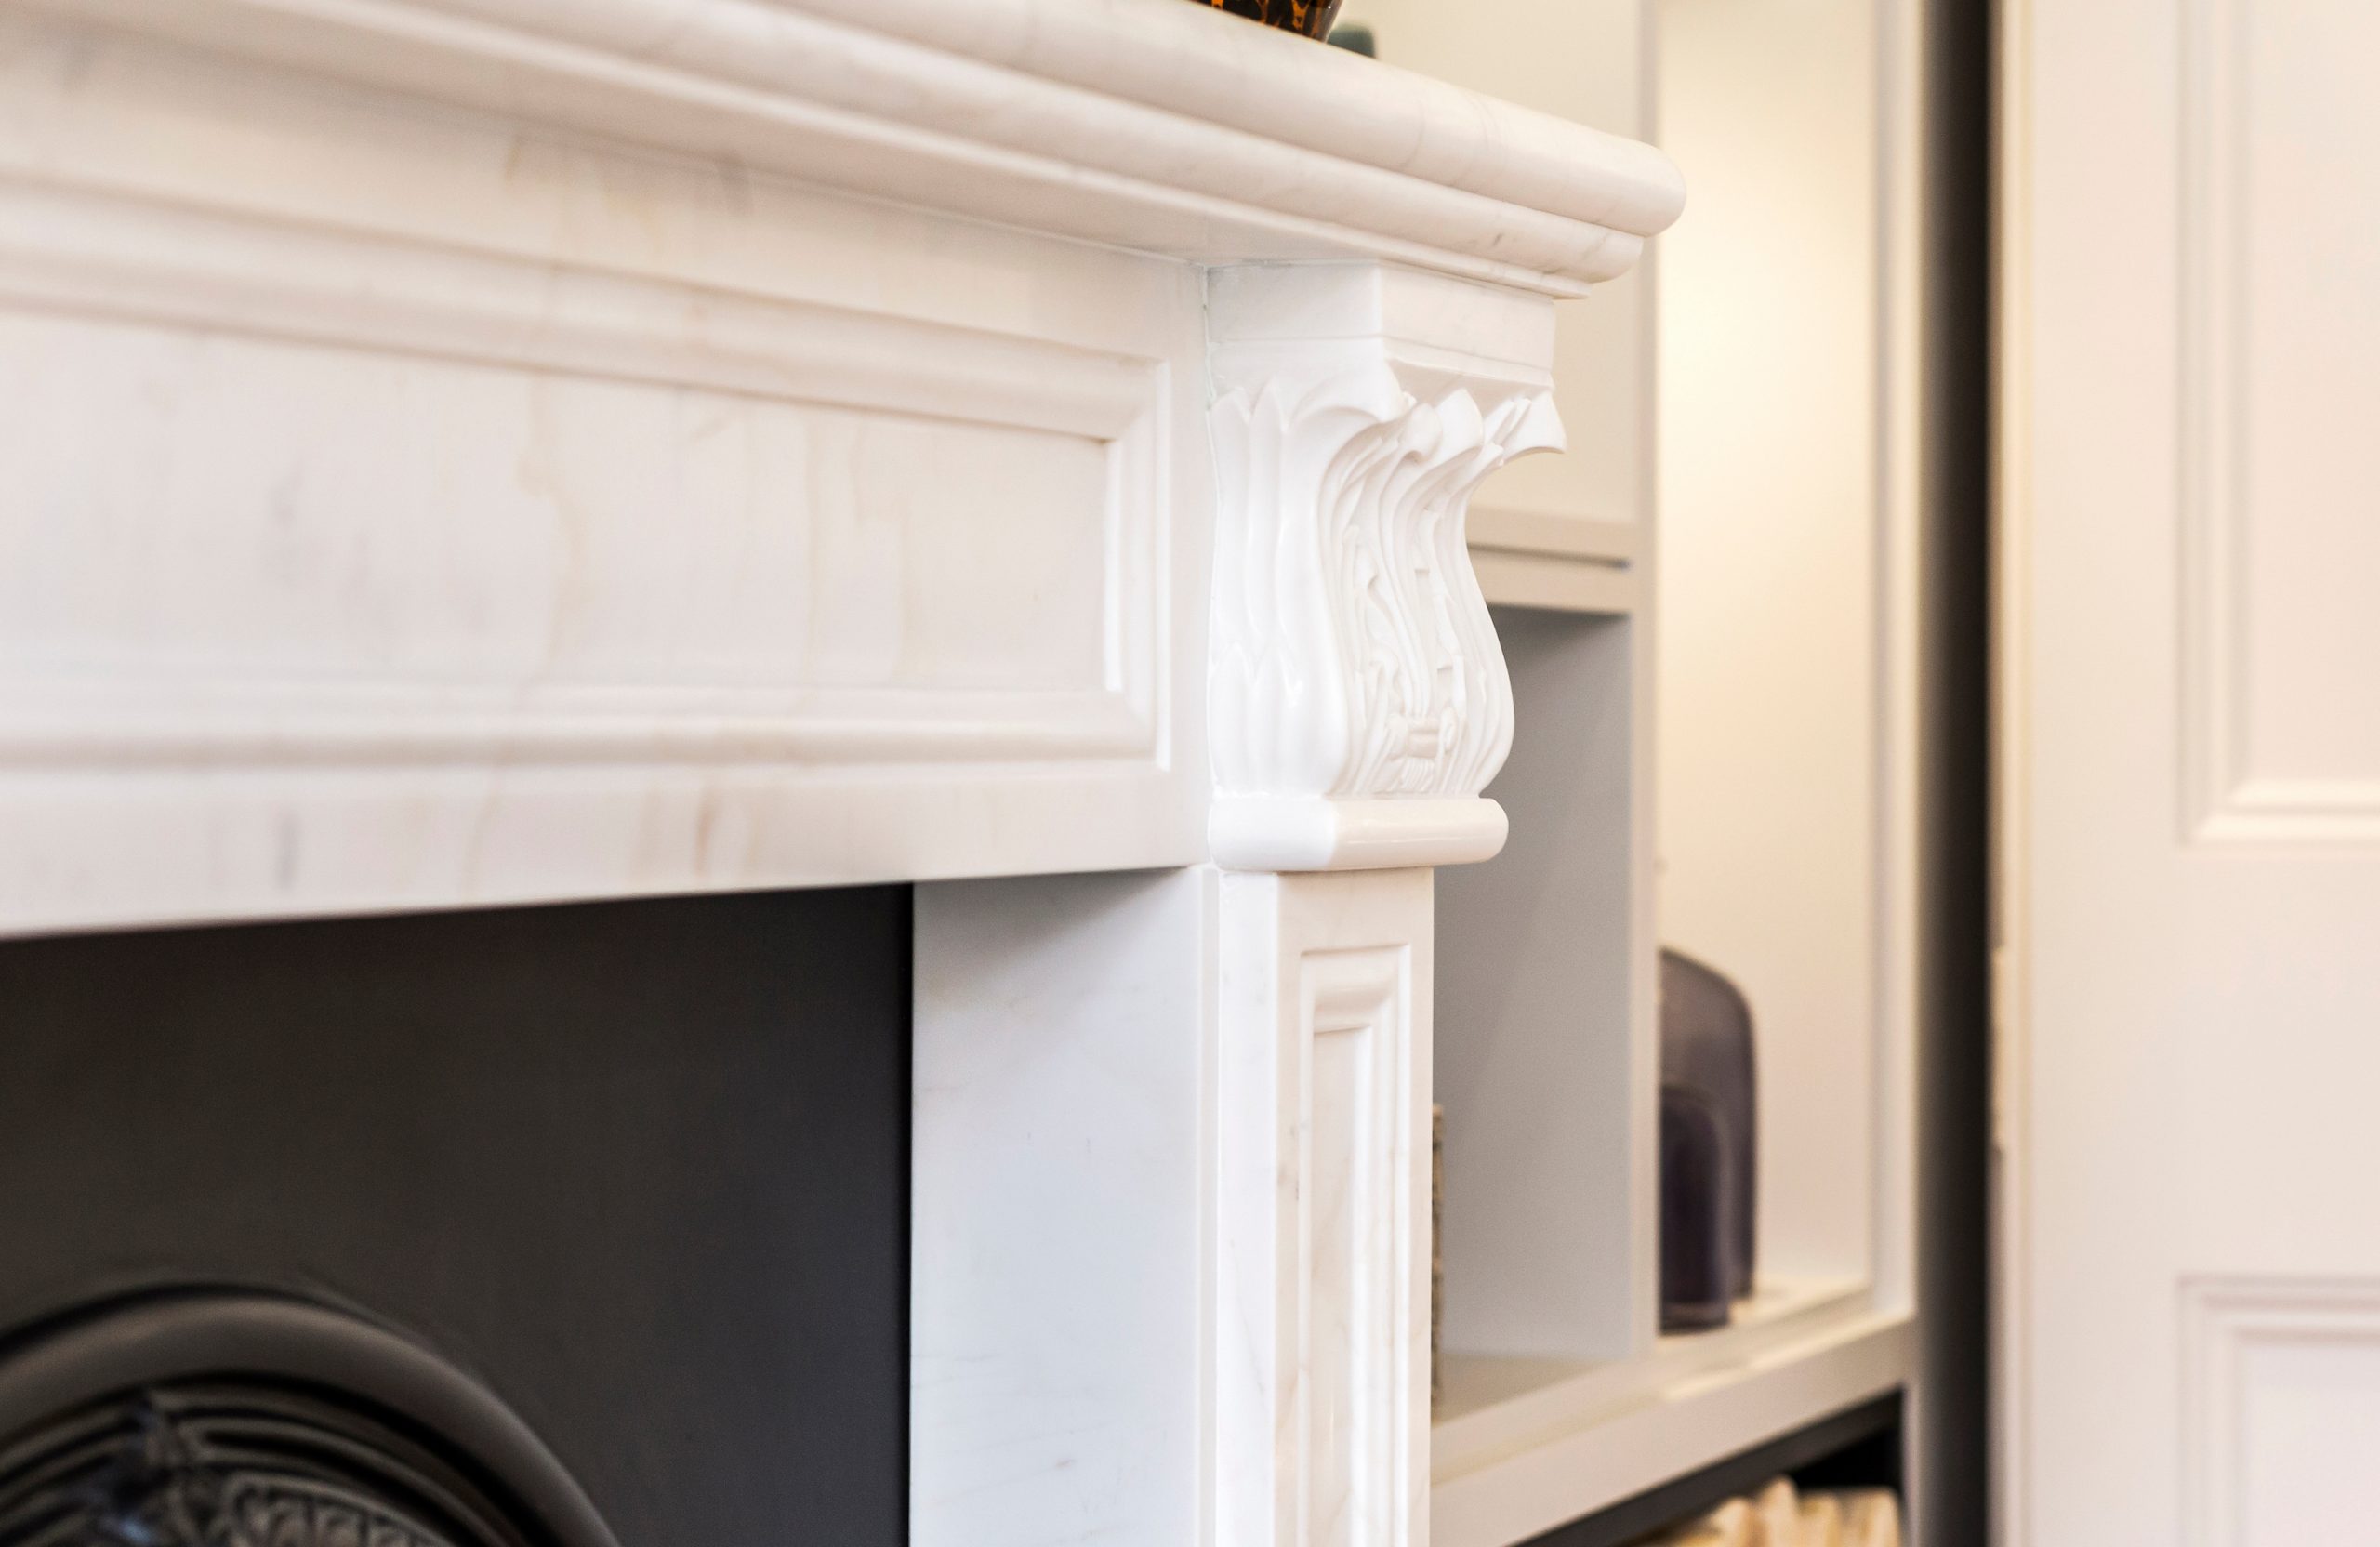 Edwardian Townhouse - living room fire place detail